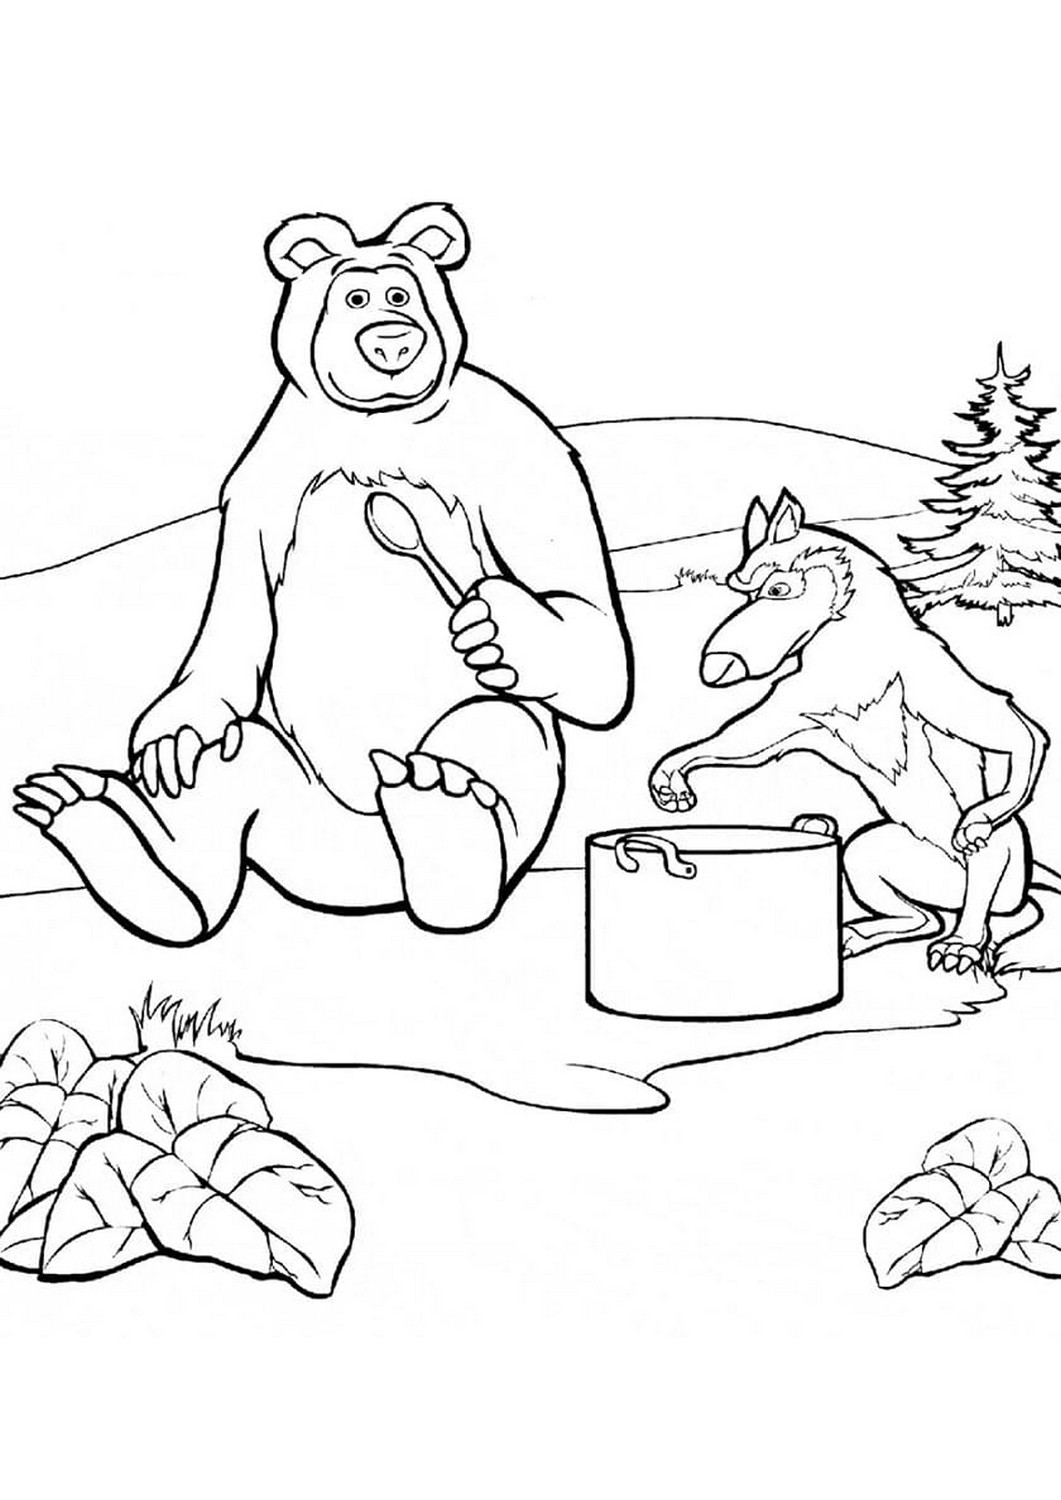 Masha and the Bear 88 drawing from Masha and the Bear to print and color